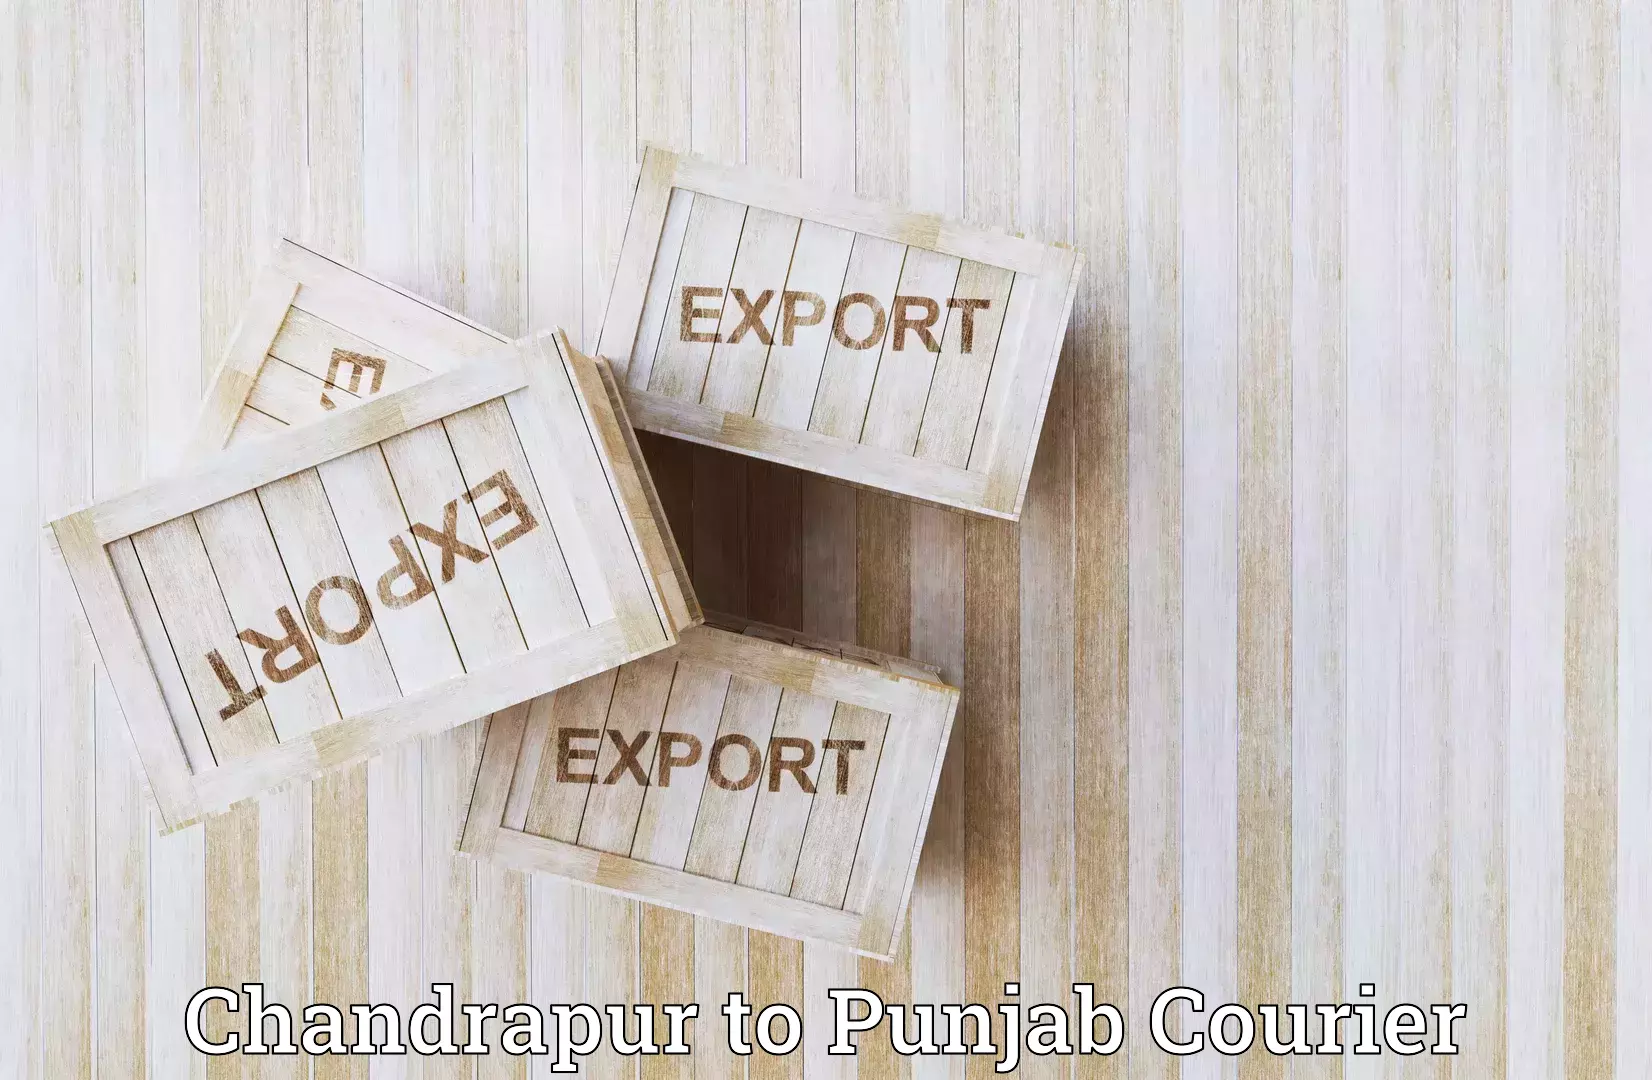 On-call courier service Chandrapur to Mohali